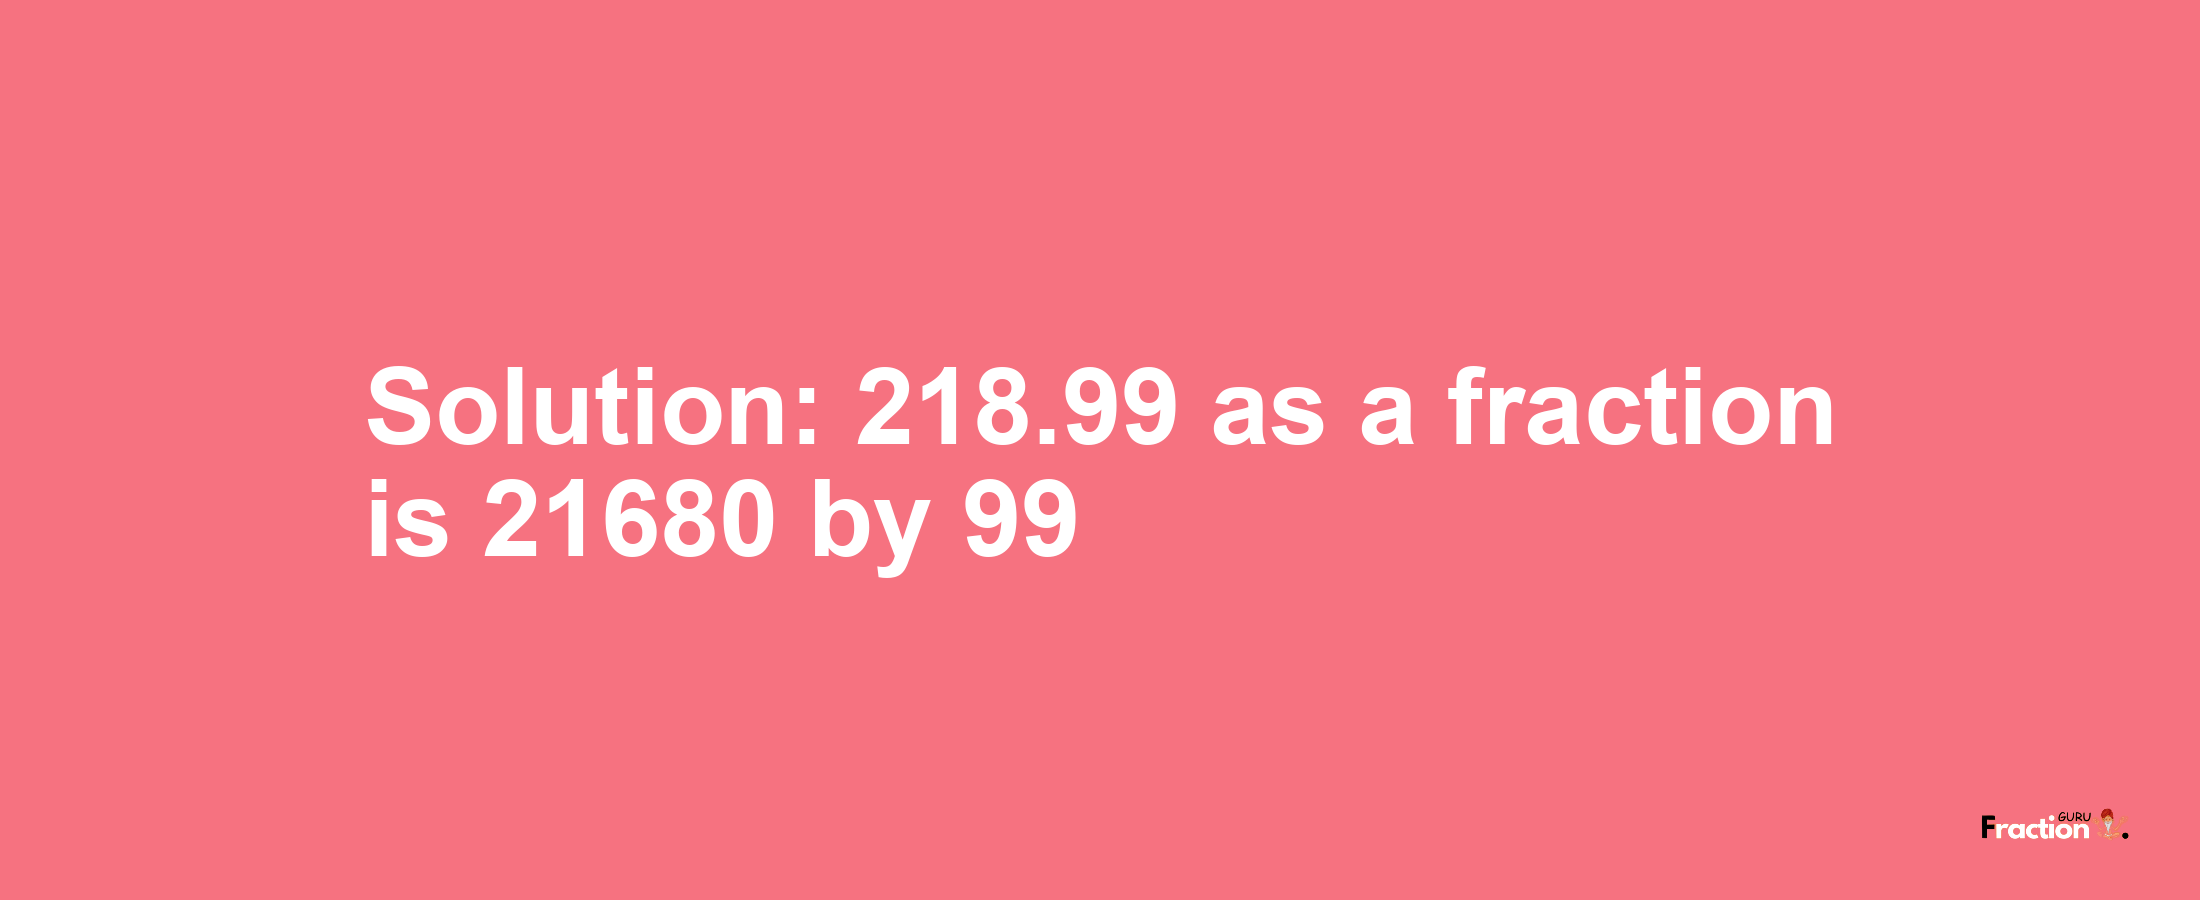 Solution:218.99 as a fraction is 21680/99